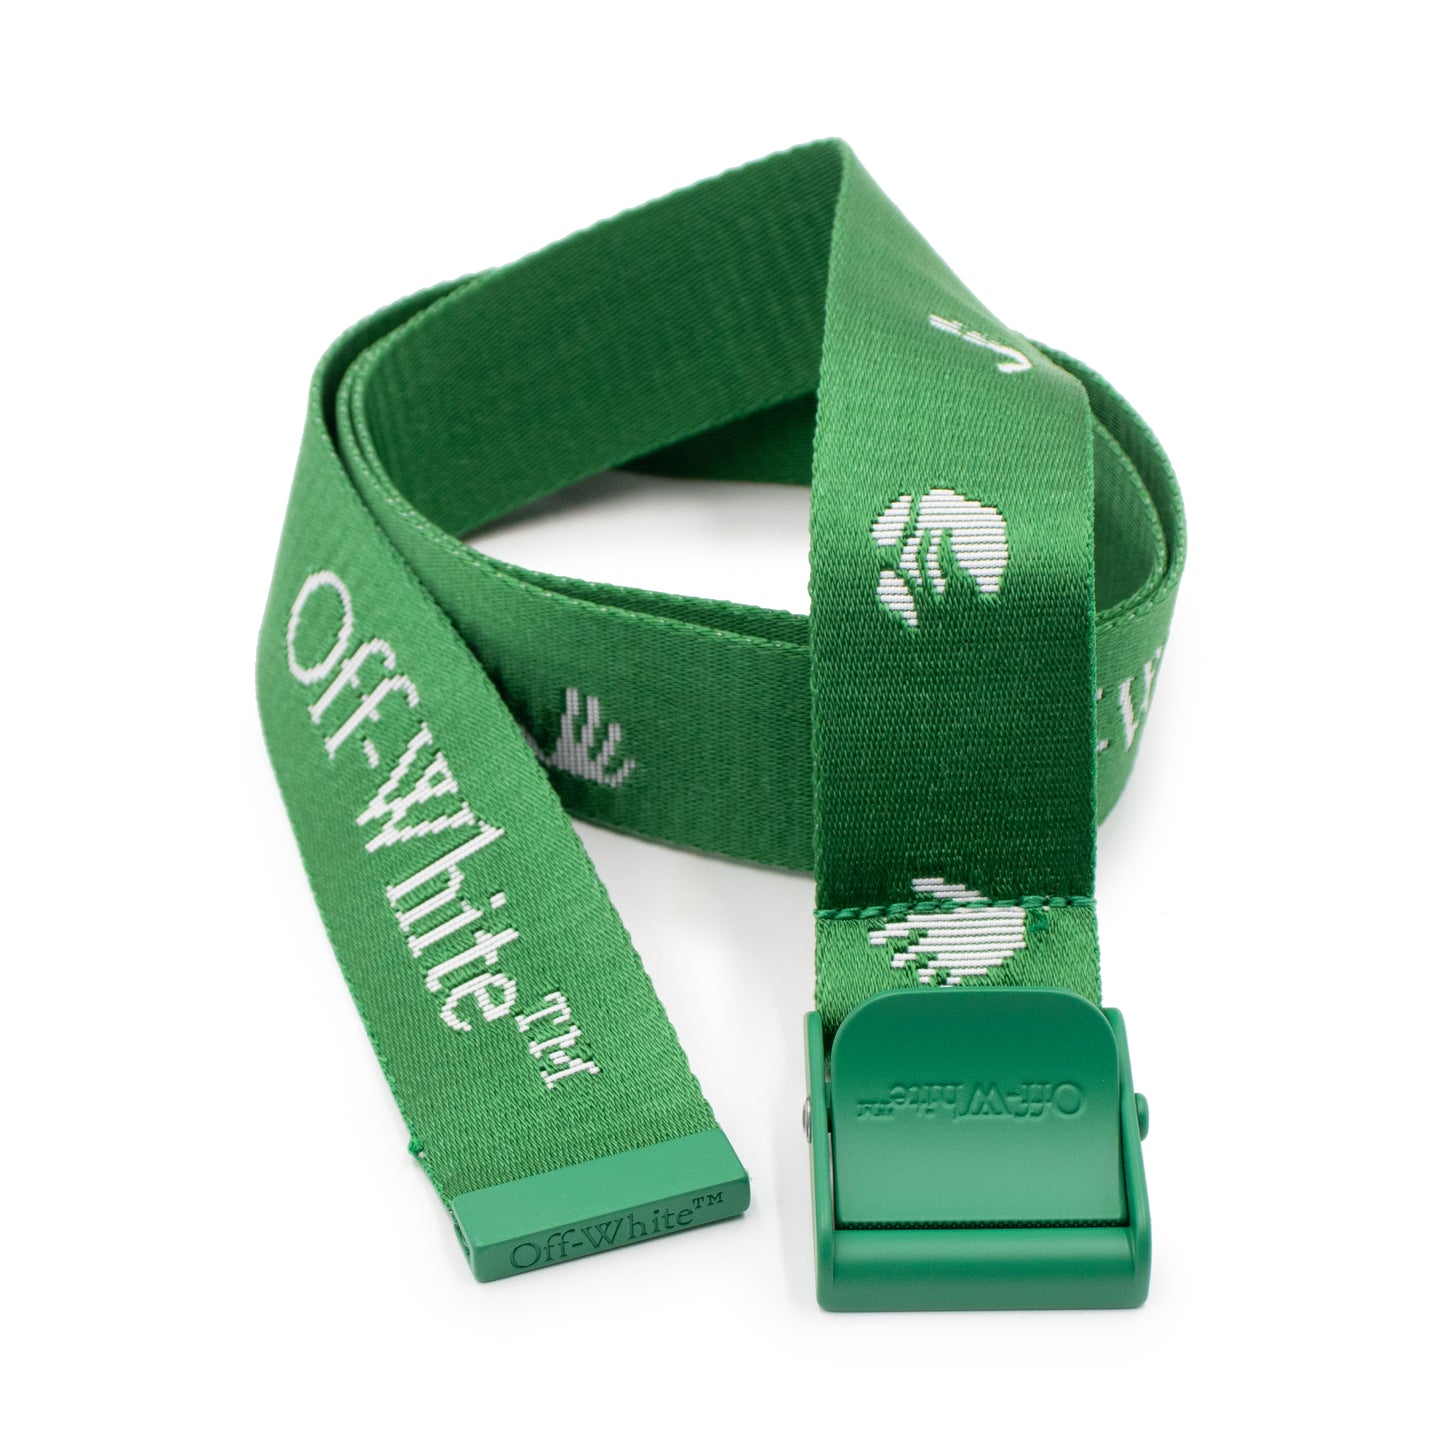 New Logo Classic Industrial Belt in Green/White